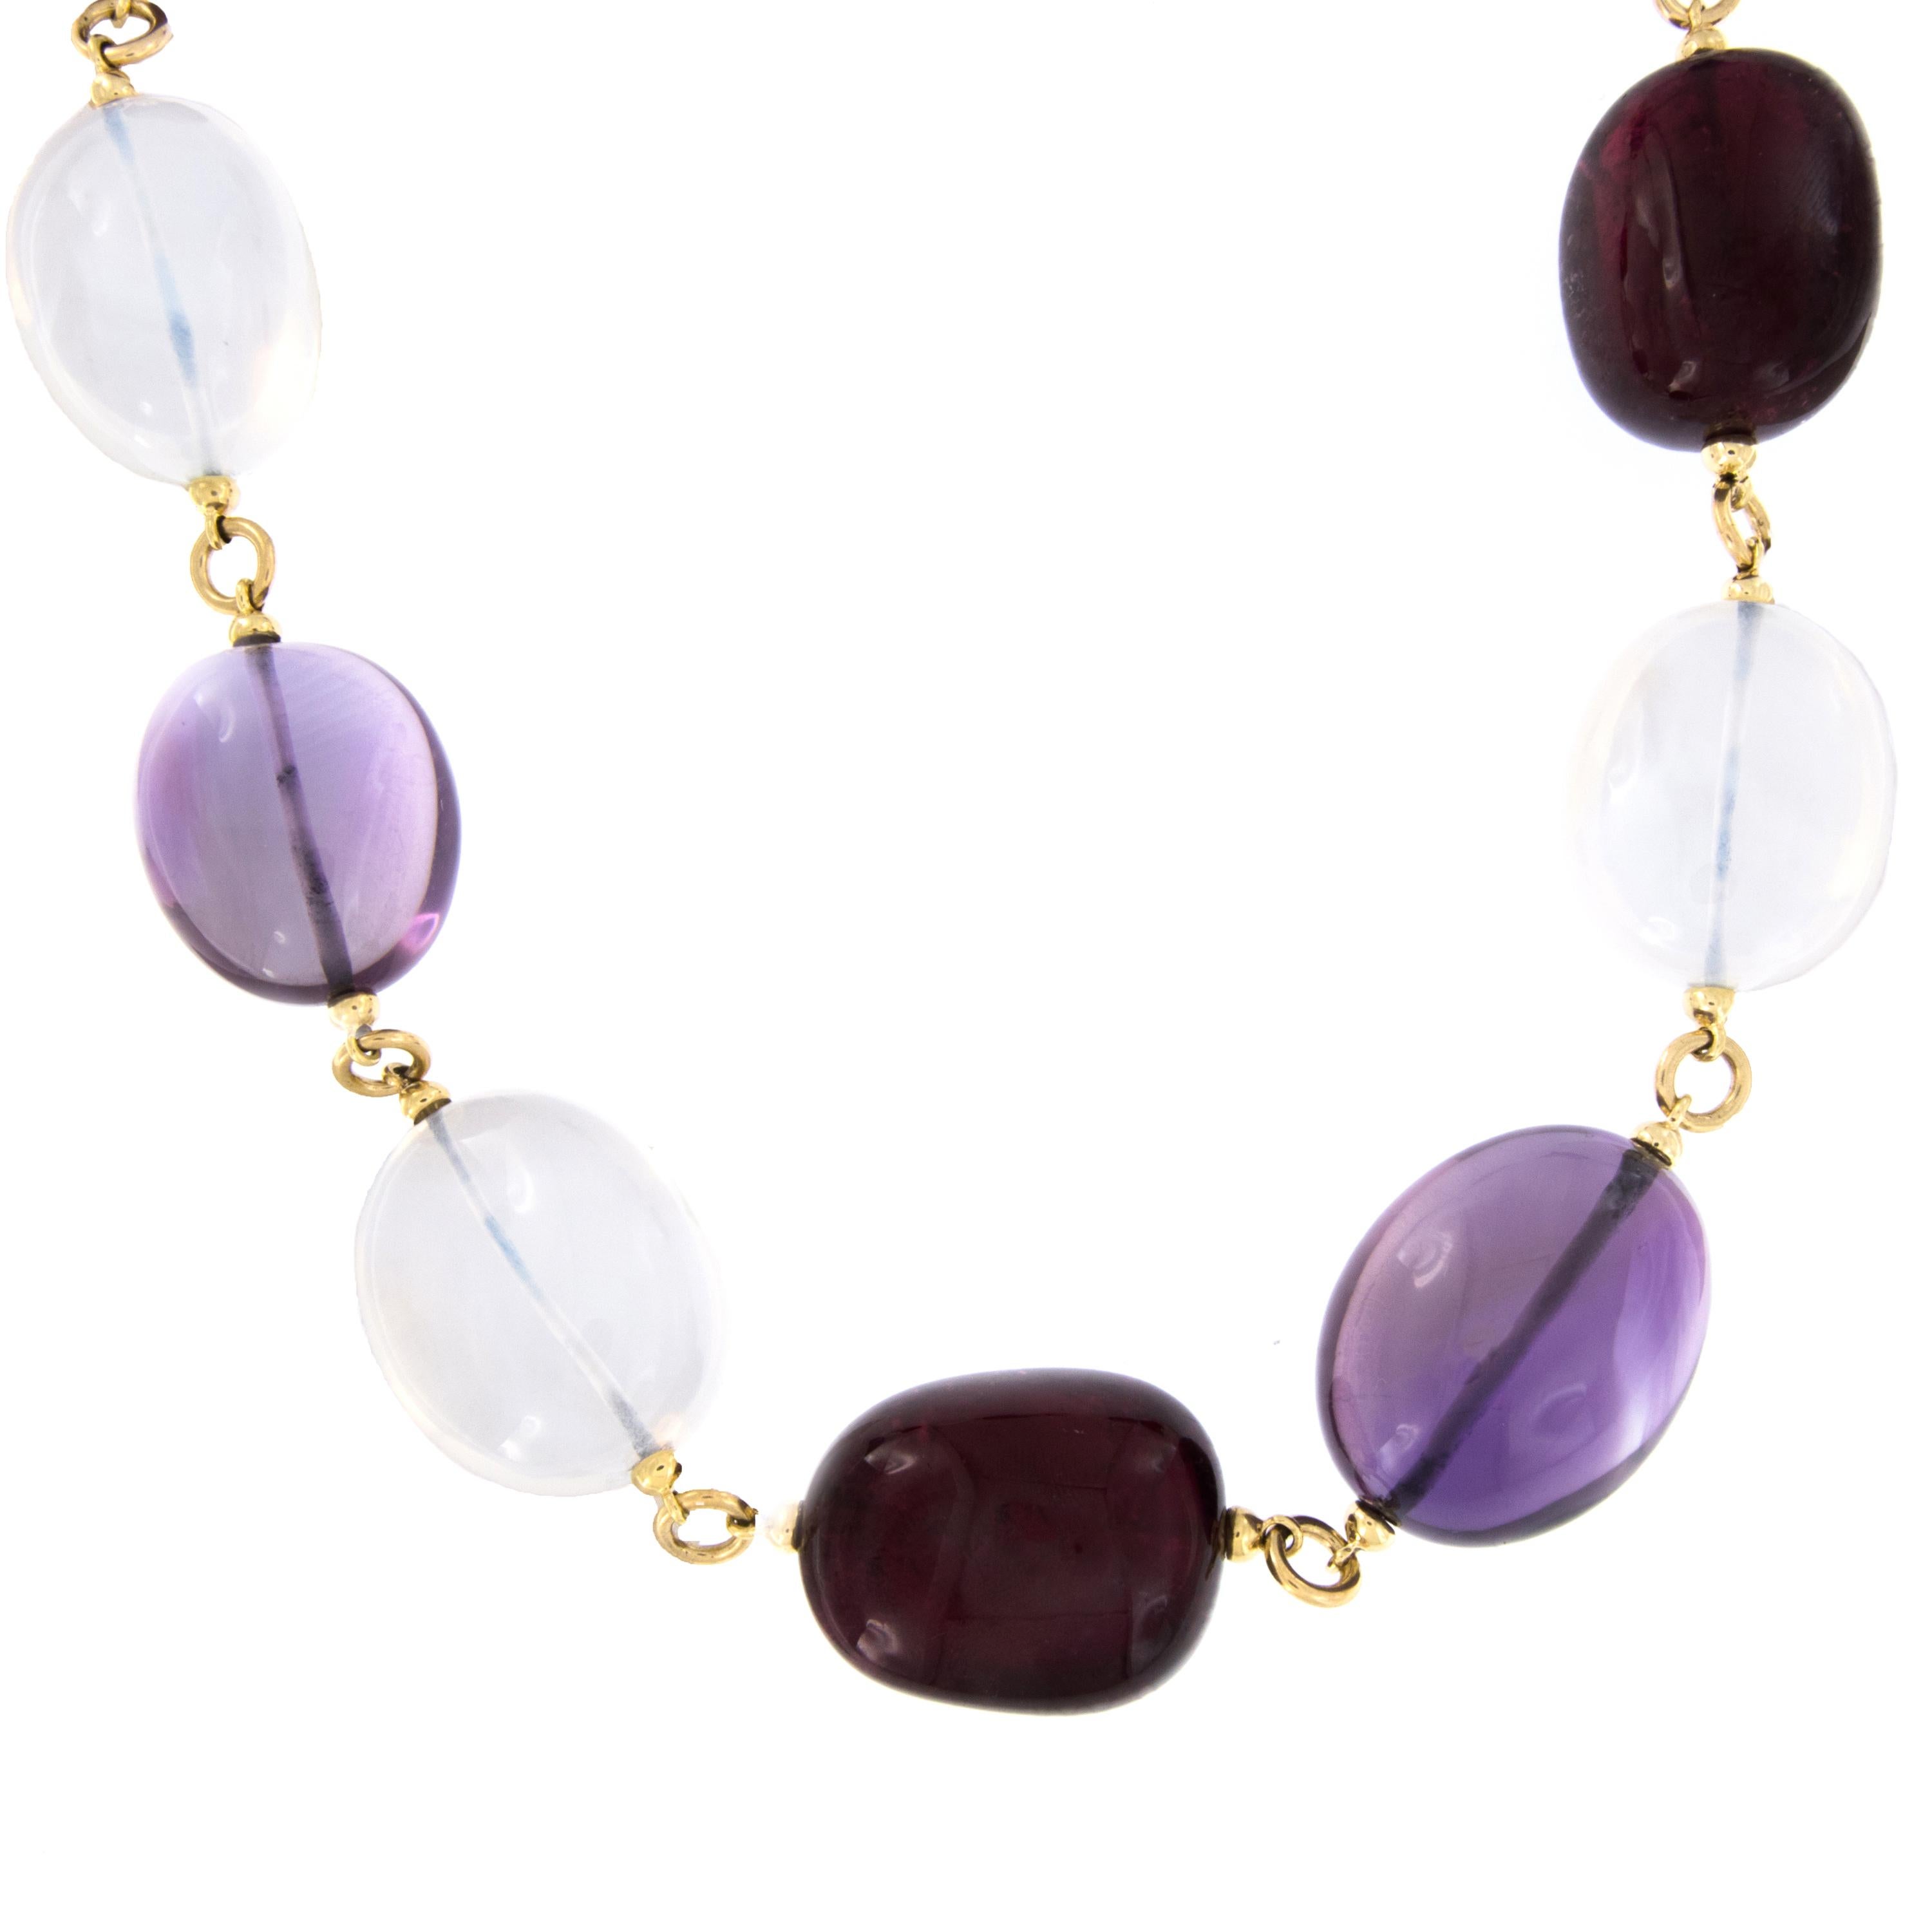 Women's or Men's Goshwara One of a Kind Gold, Amethyst, Moon Quartz and Rubelite Beaded Necklace